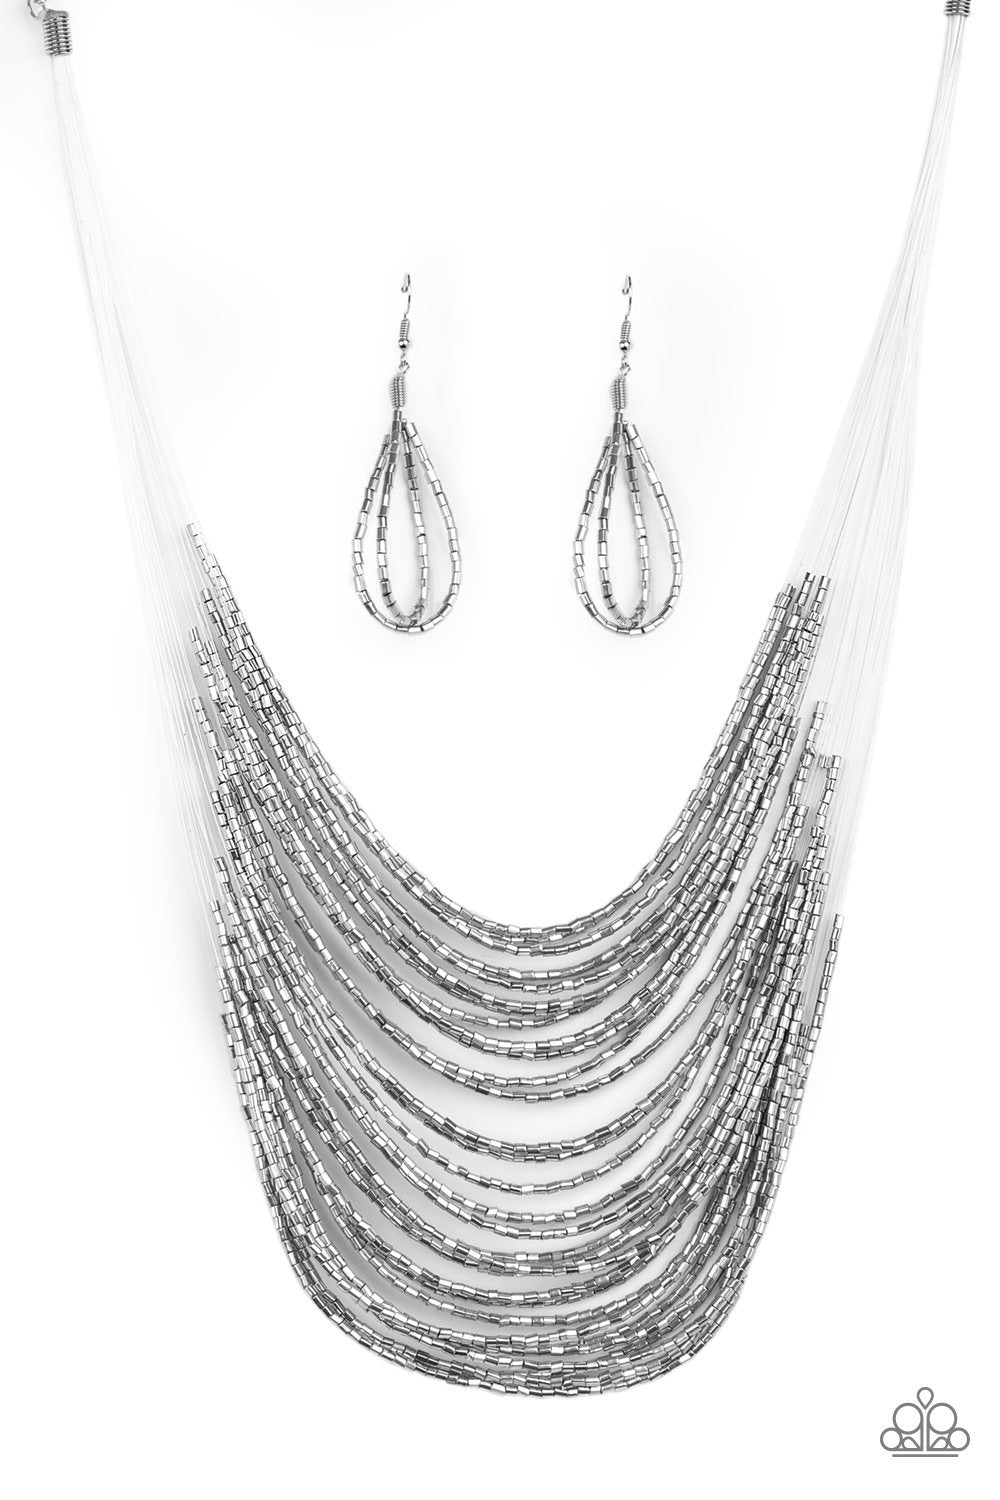 Catwalk Queen Metallic Silver Seed Bead Necklace and matching Earrings - Paparazzi Accessories-CarasShop.com - $5 Jewelry by Cara Jewels